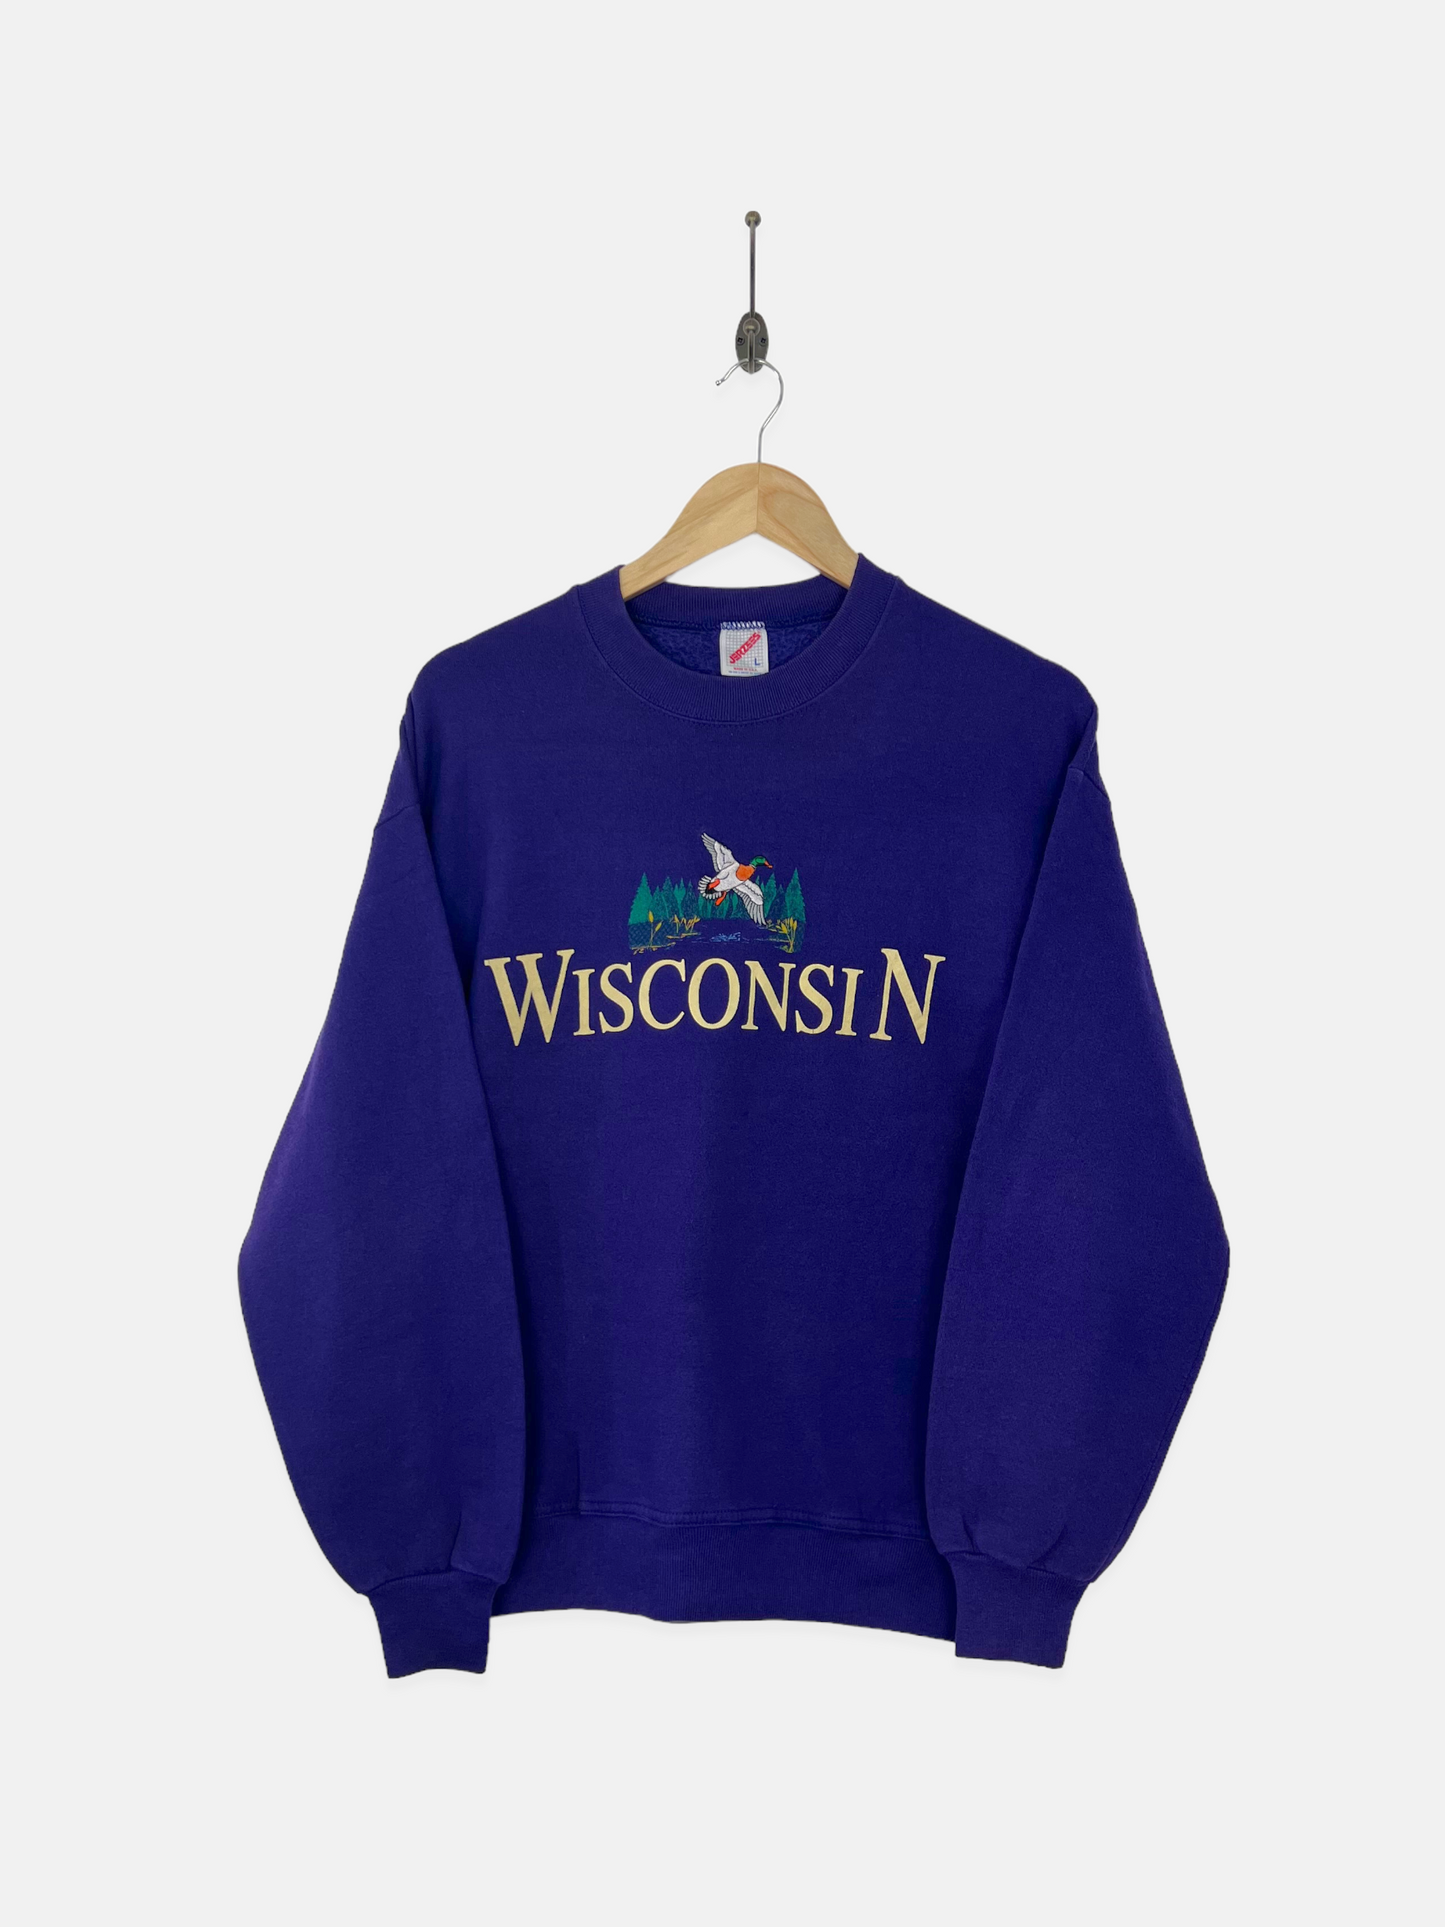 90's Wisconsin USA Made Embroidered Vintage Sweatshirt Size 10